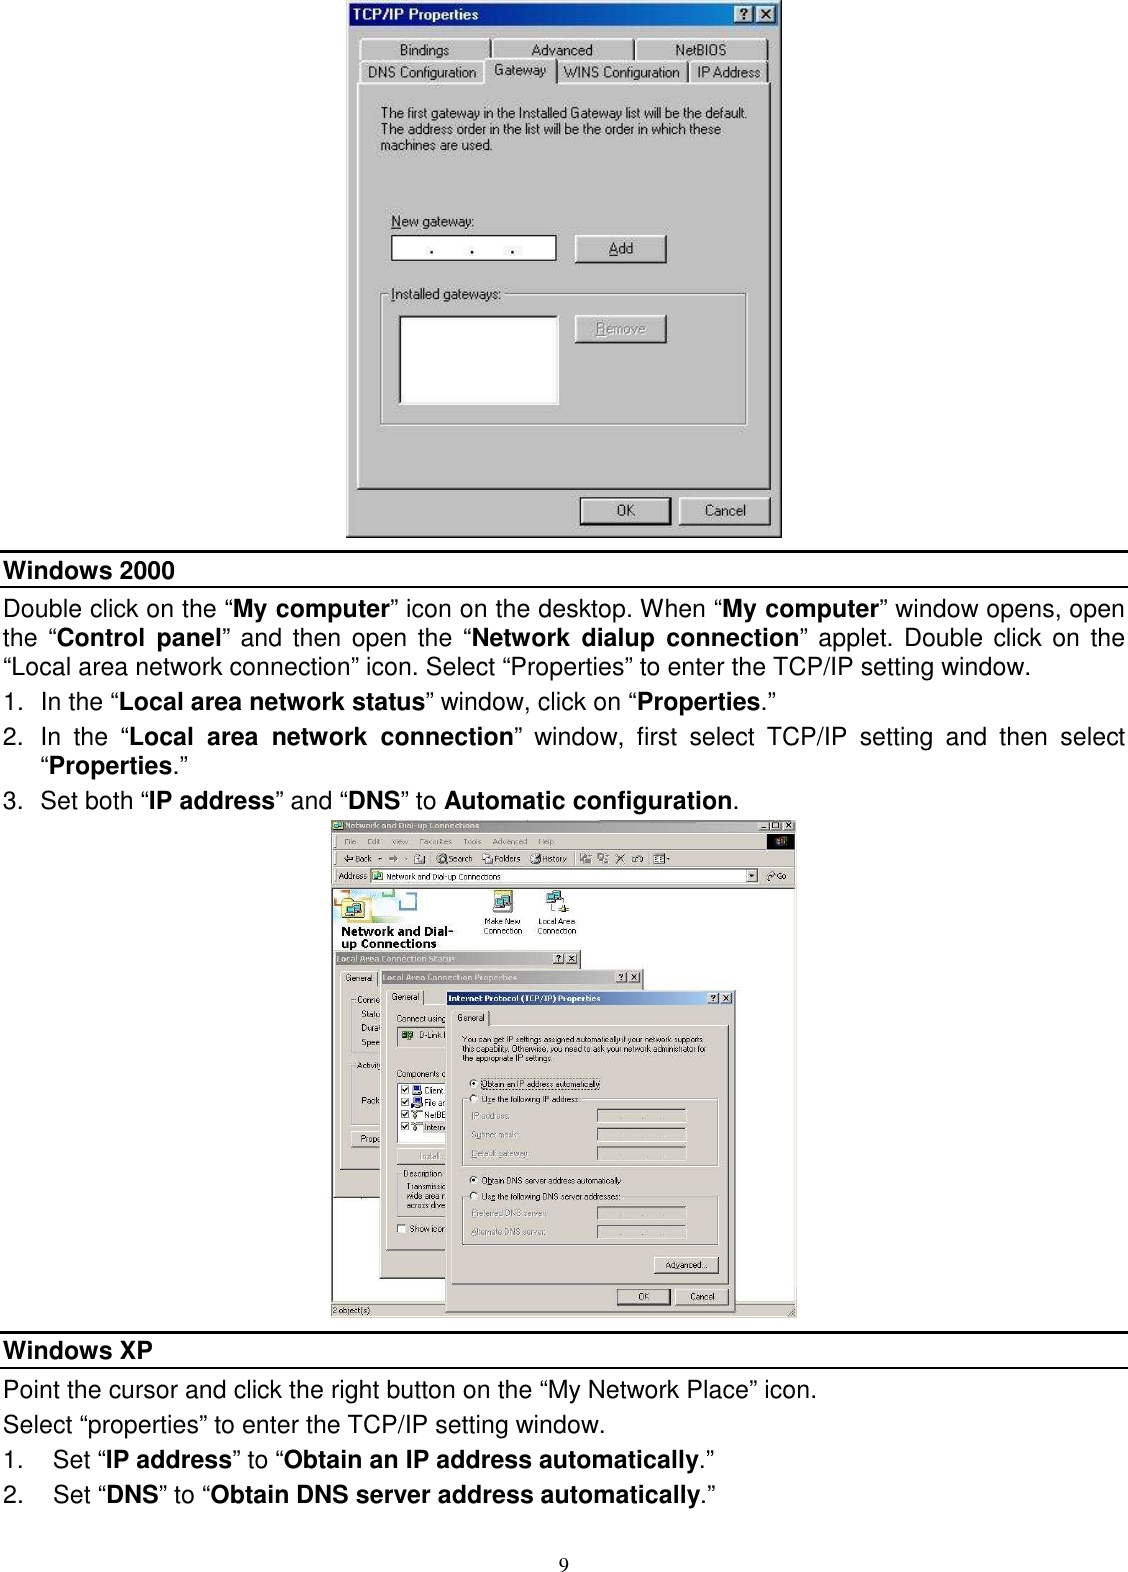  9  Windows 2000 Double click on the “My computer” icon on the desktop. When “My computer” window opens, open the “Control  panel” and then open  the “Network  dialup  connection” applet. Double click on  the “Local area network connection” icon. Select “Properties” to enter the TCP/IP setting window. 1.  In the “Local area network status” window, click on “Properties.” 2.  In  the  “Local  area  network  connection”  window,  first  select  TCP/IP  setting  and  then  select “Properties.” 3.  Set both “IP address” and “DNS” to Automatic configuration.  Windows XP Point the cursor and click the right button on the “My Network Place” icon. Select “properties” to enter the TCP/IP setting window. 1.  Set “IP address” to “Obtain an IP address automatically.” 2.  Set “DNS” to “Obtain DNS server address automatically.” 